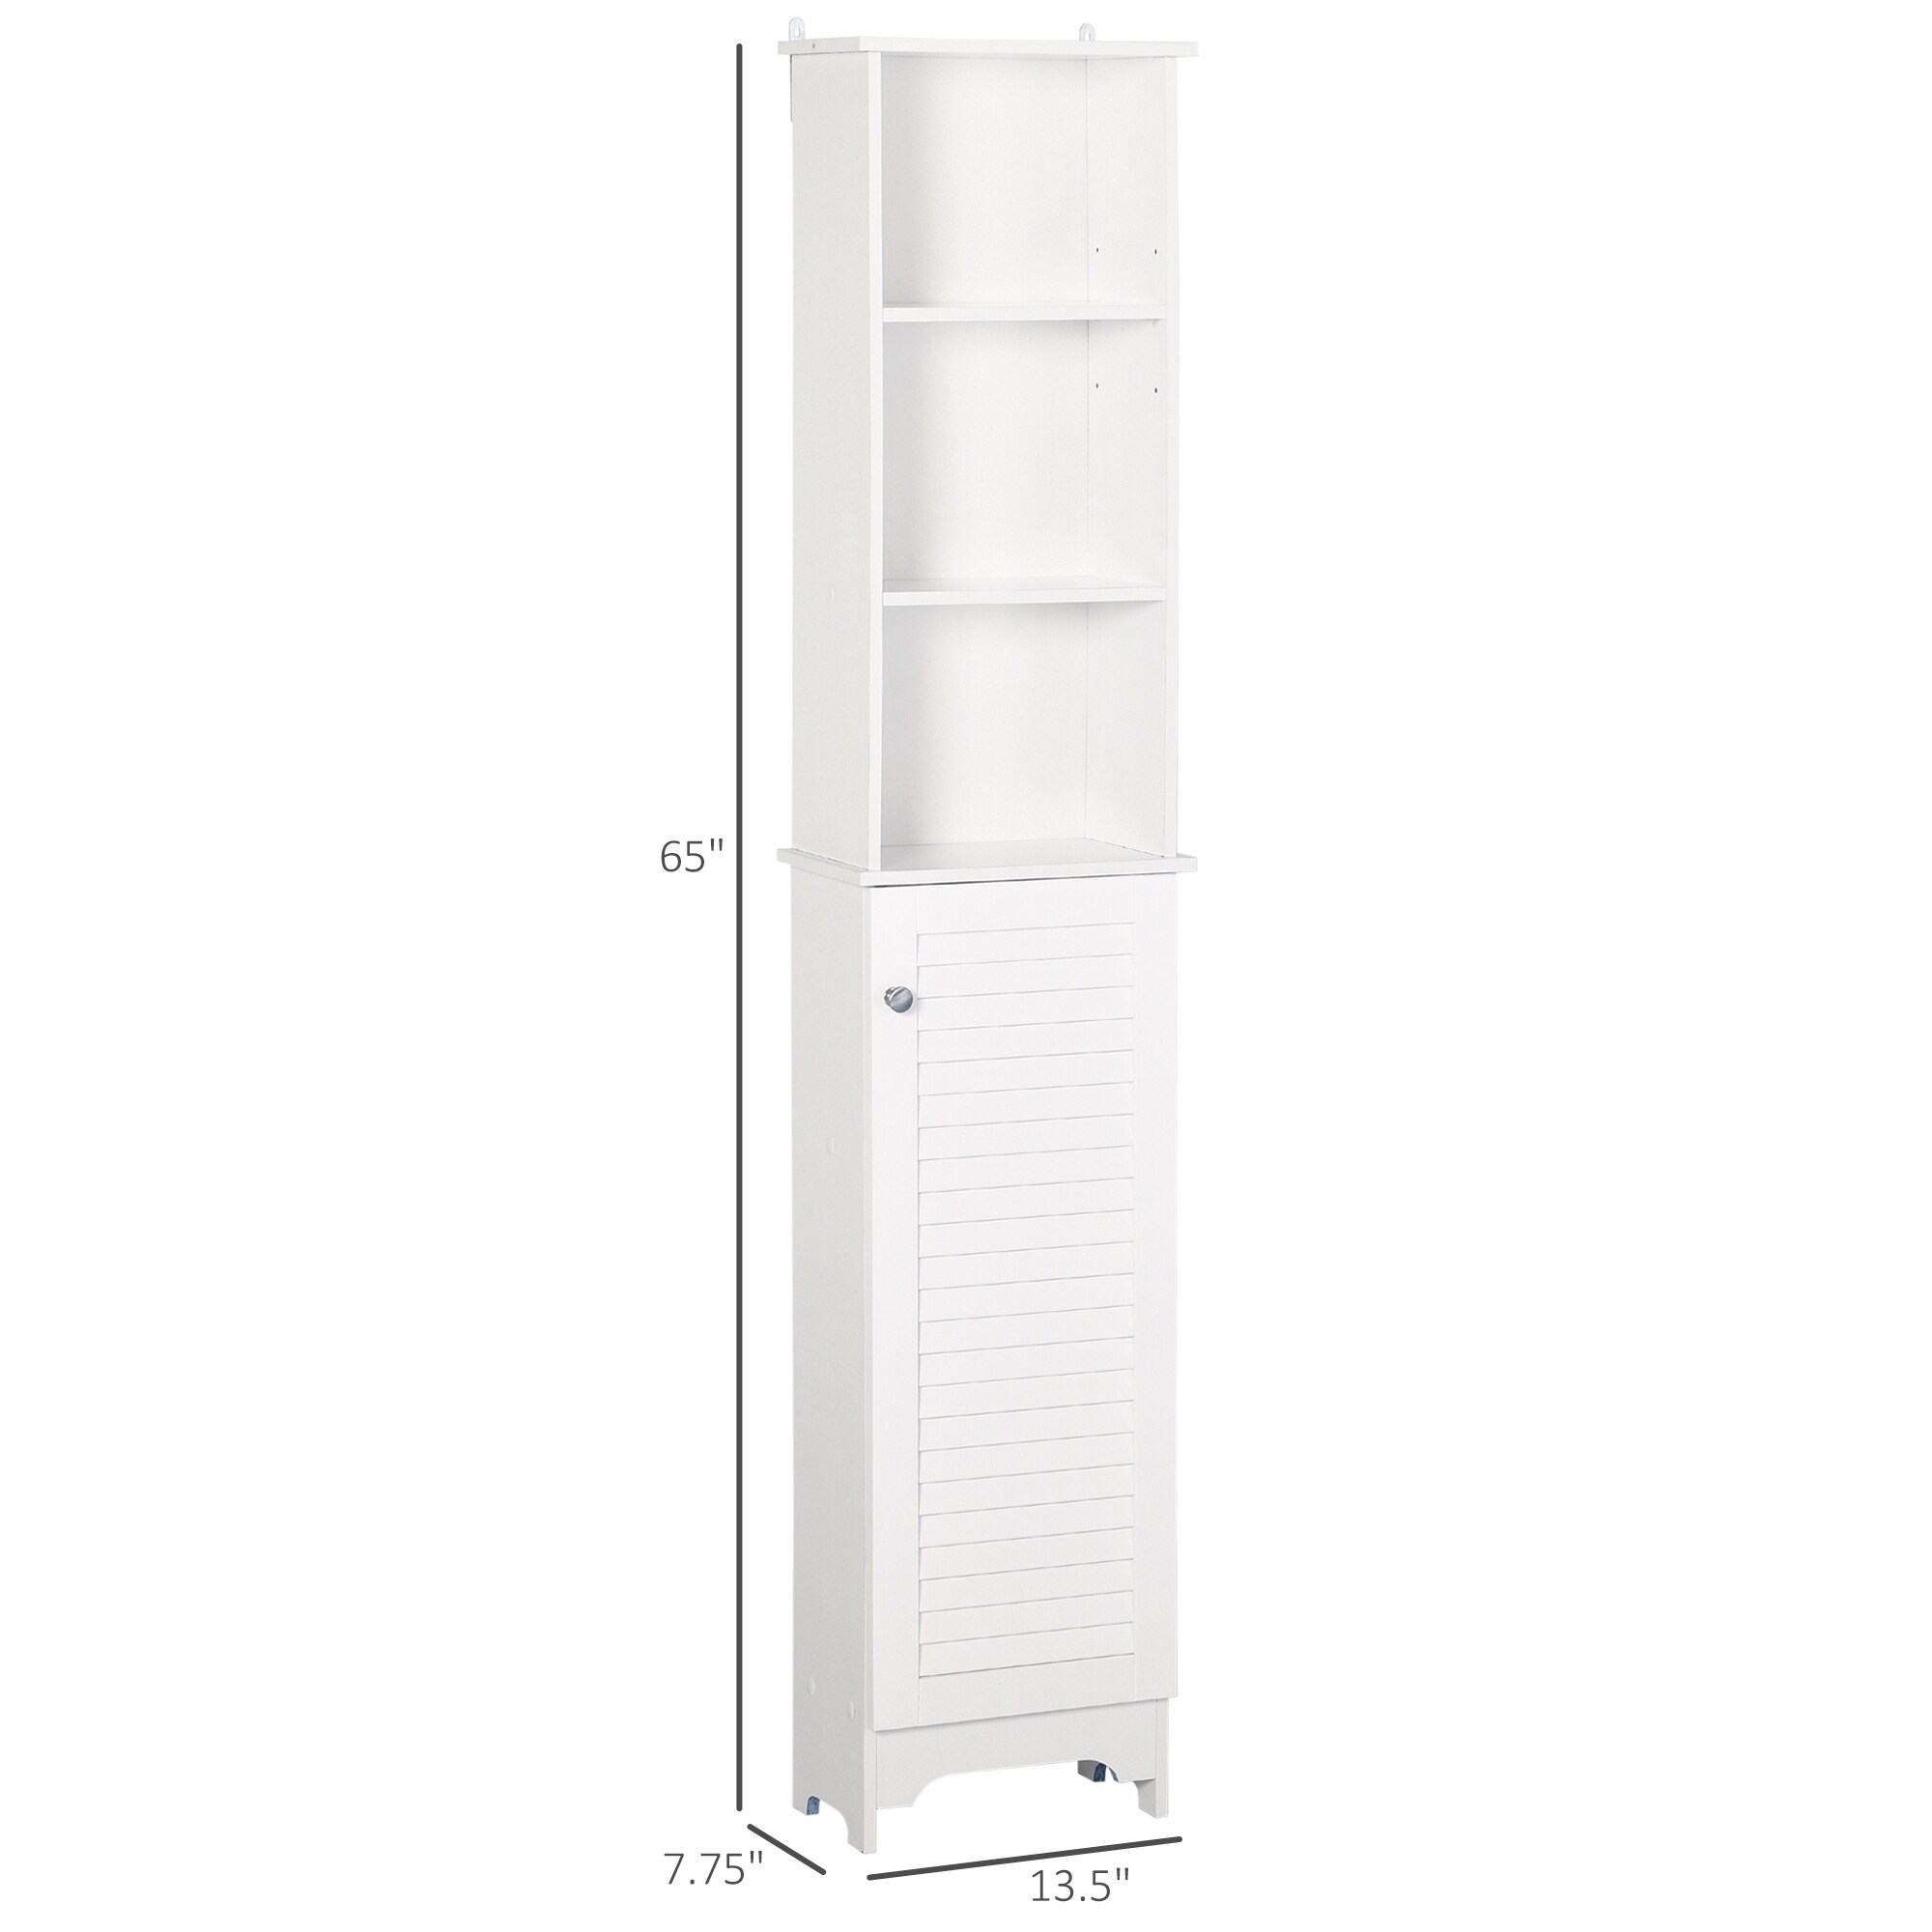 https://ak1.ostkcdn.com/images/products/is/images/direct/7fd6e88eee0a0532dc0f9476f2e4e94a8088e899/HOMCOM-Freestanding-Bathroom-Tall-Storage-Cabinet-Organizer-Tower-Cupboard-Adjustable-Shelves-Wooden-Furniture-White.jpg